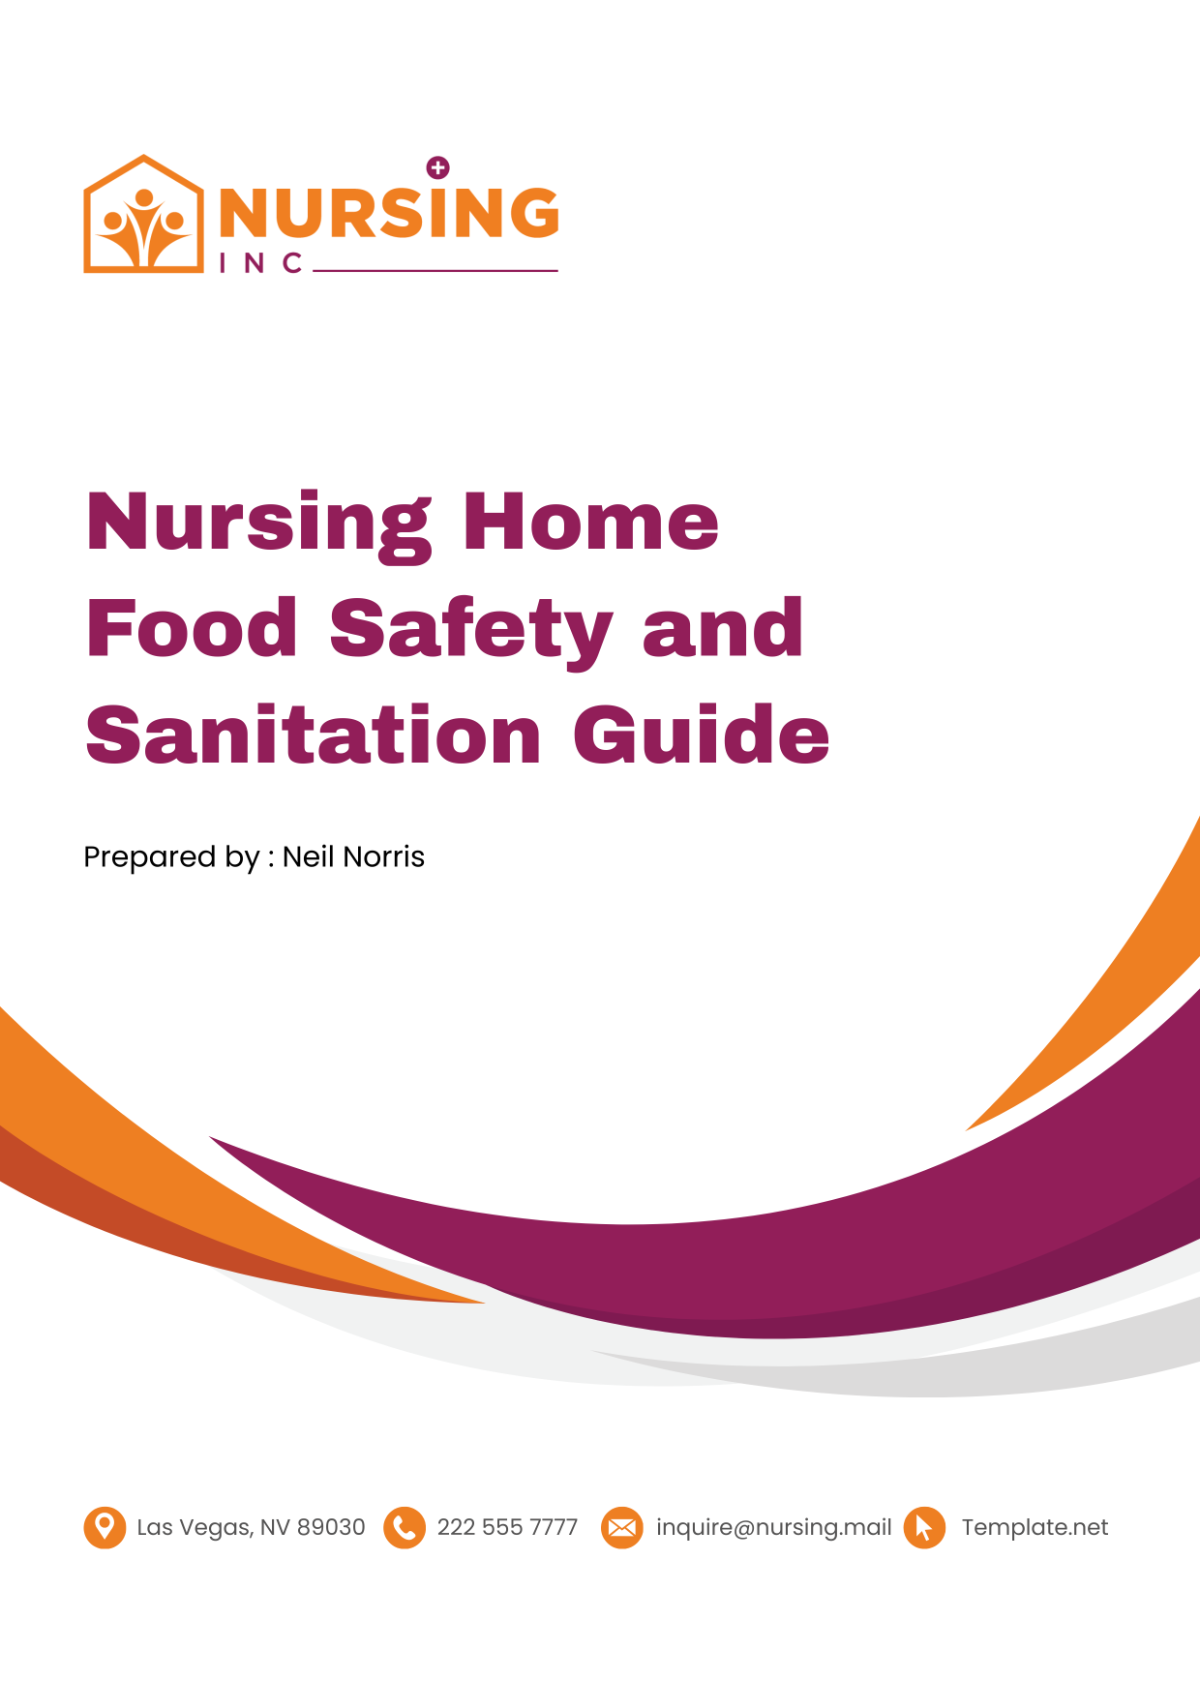 Nursing Home Food Safety and Sanitation Guide Template